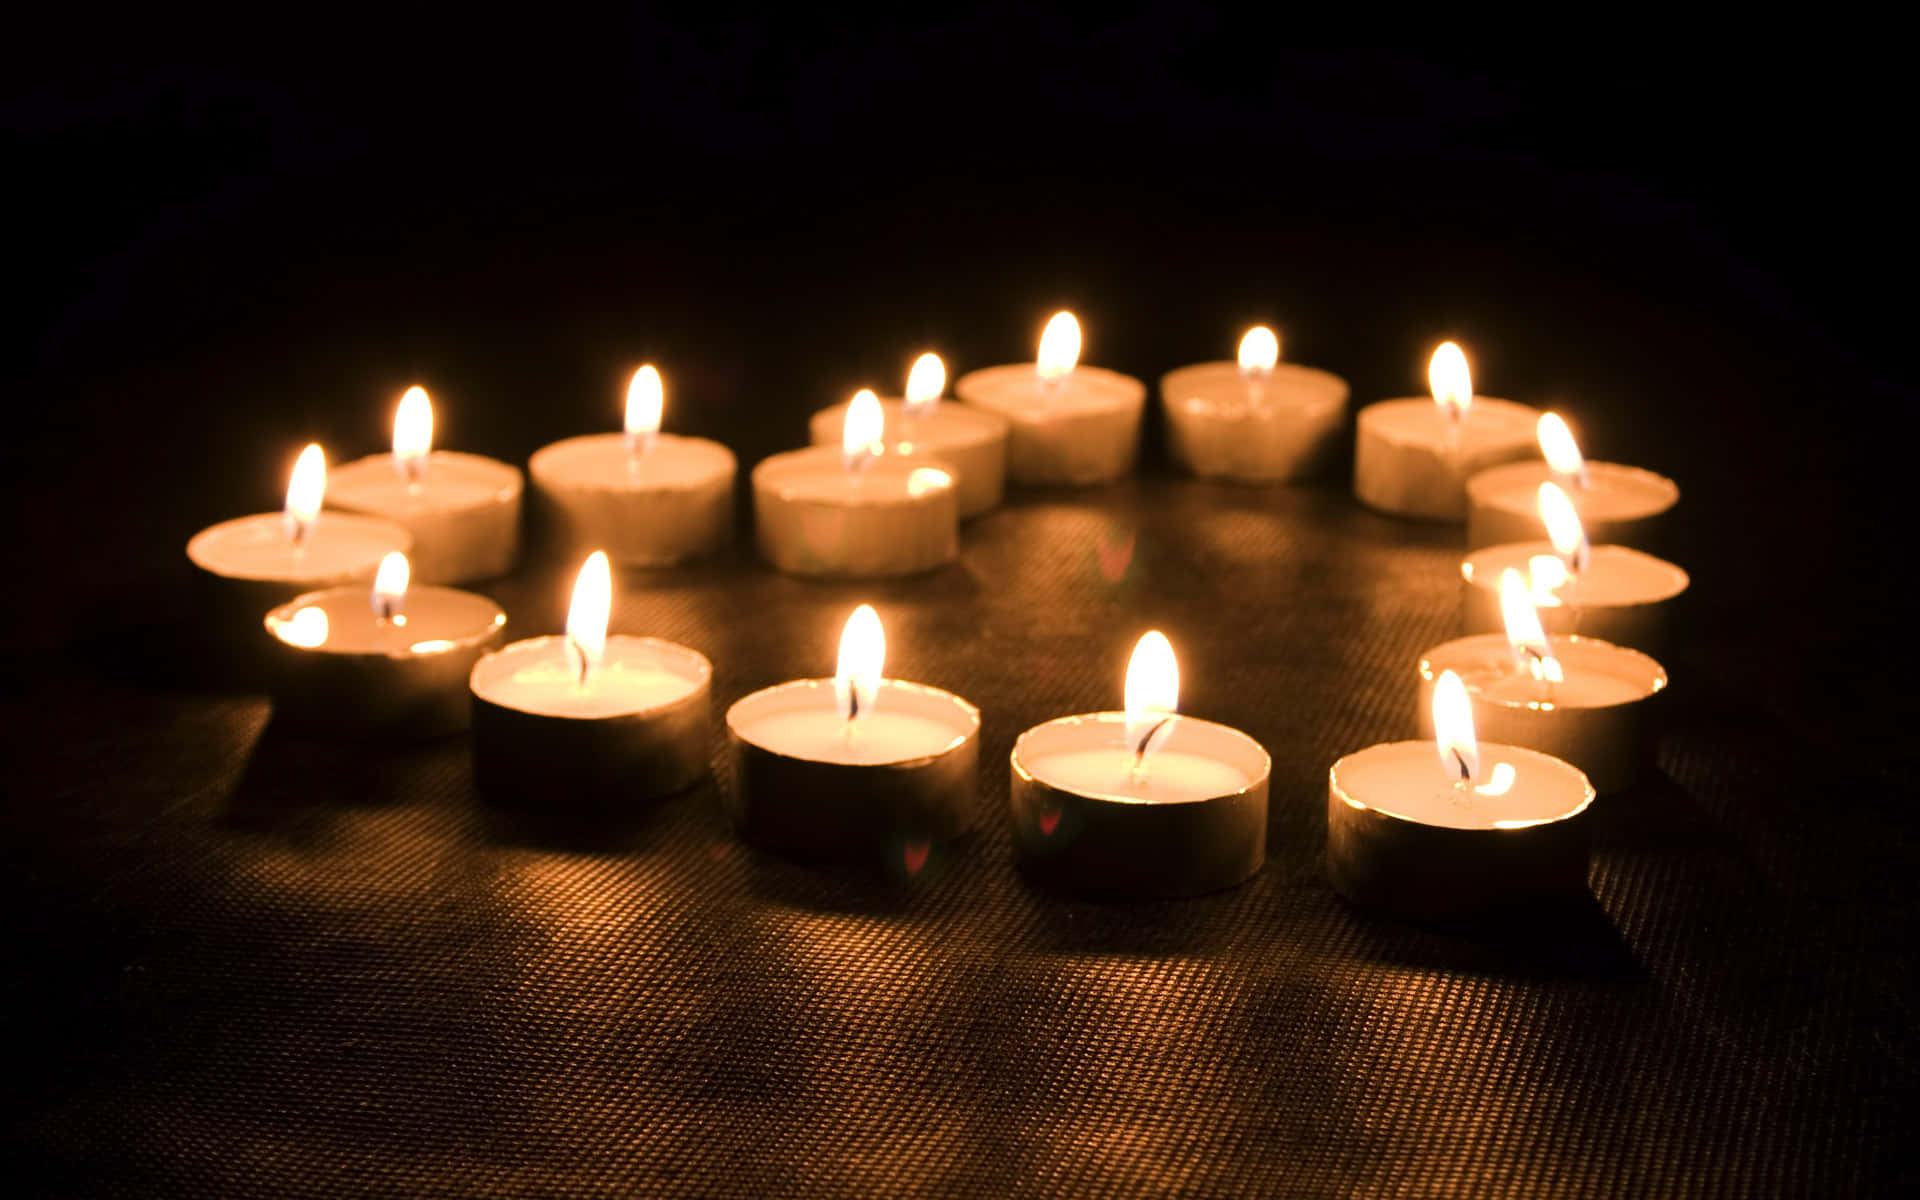 "The soft light of the flickering candle creates a still moment of peace."